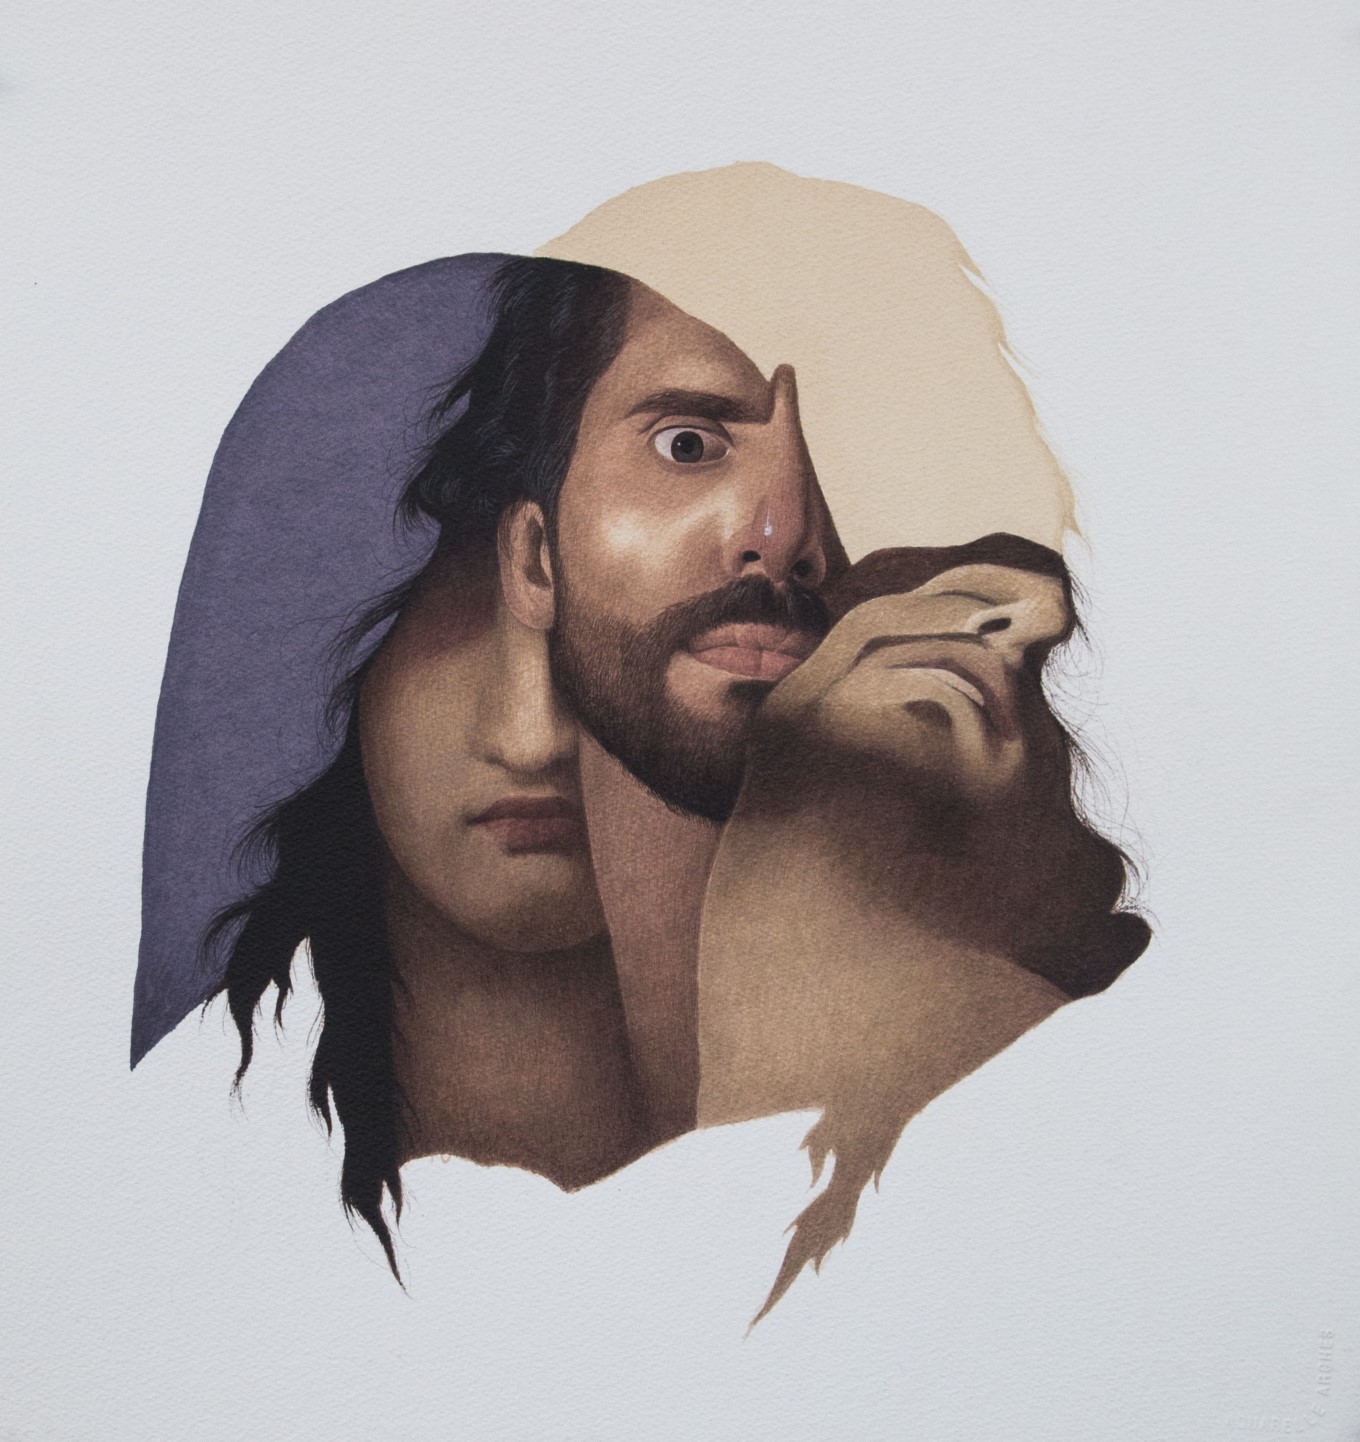 Title: Pieta<br></br>Medium: Opaque water colour on paper<br></br>Size: 18.5 x 19.5 inches